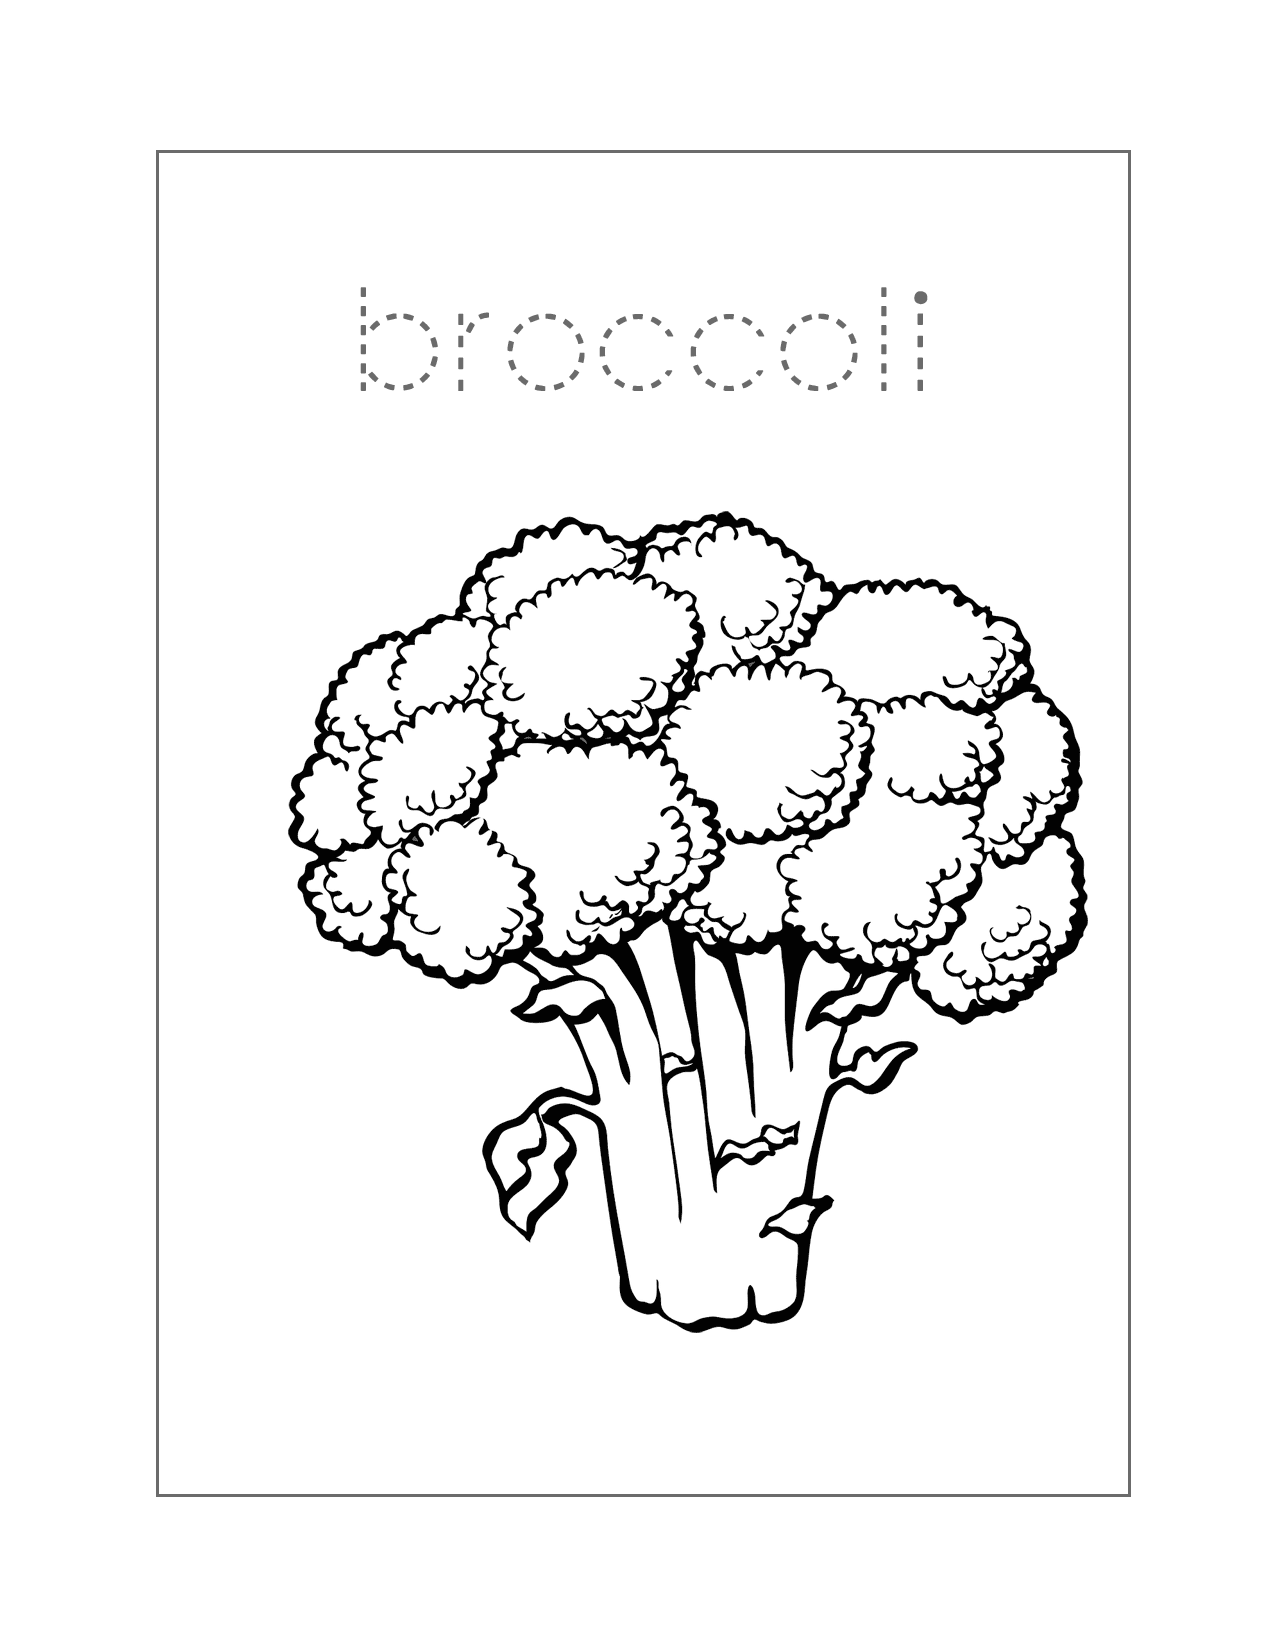 Broccoli Spelling Coloring Sheet